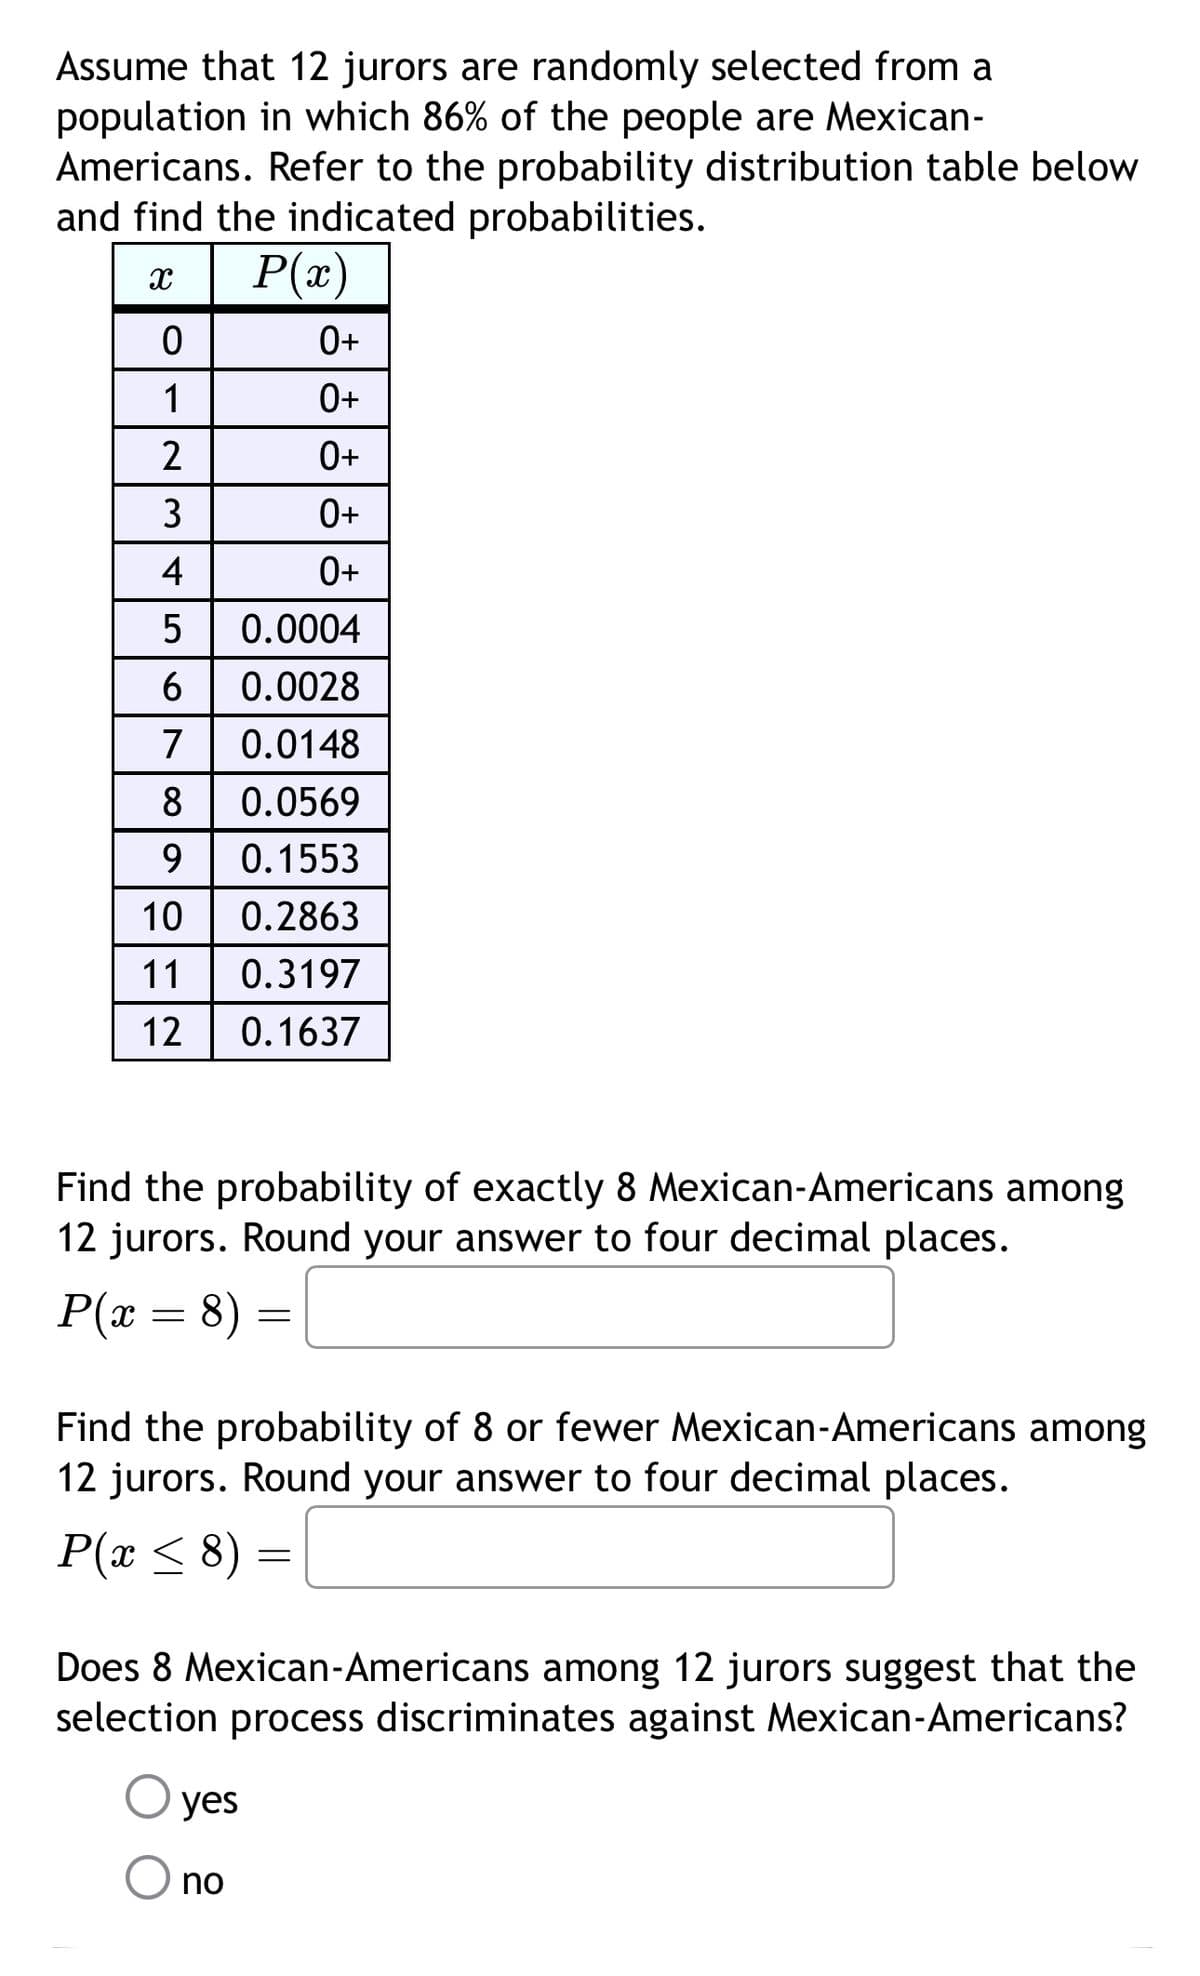 Assume that 12 jurors are randomly selected from a
population in which 86% of the people are Mexican-
Americans. Refer to the probability distribution table below
and find the indicated probabilities.
x | P(x)
0+
0
1
0+
2
0+
3
0+
4
0+
5
0.0004
6 0.0028
7
0.0148
8 0.0569
9 0.1553
10
0.2863
11 | 0.3197
12
0.1637
Find the probability of exactly 8 Mexican-Americans among
12 jurors. Round your answer to four decimal places.
P(x = 8) =
Find the probability of 8 or fewer Mexican-Americans among
12 jurors. Round your answer to four decimal places.
P(x ≤ 8) =
Does 8 Mexican-Americans among 12 jurors suggest that the
selection process discriminates against Mexican-Americans?
yes
no